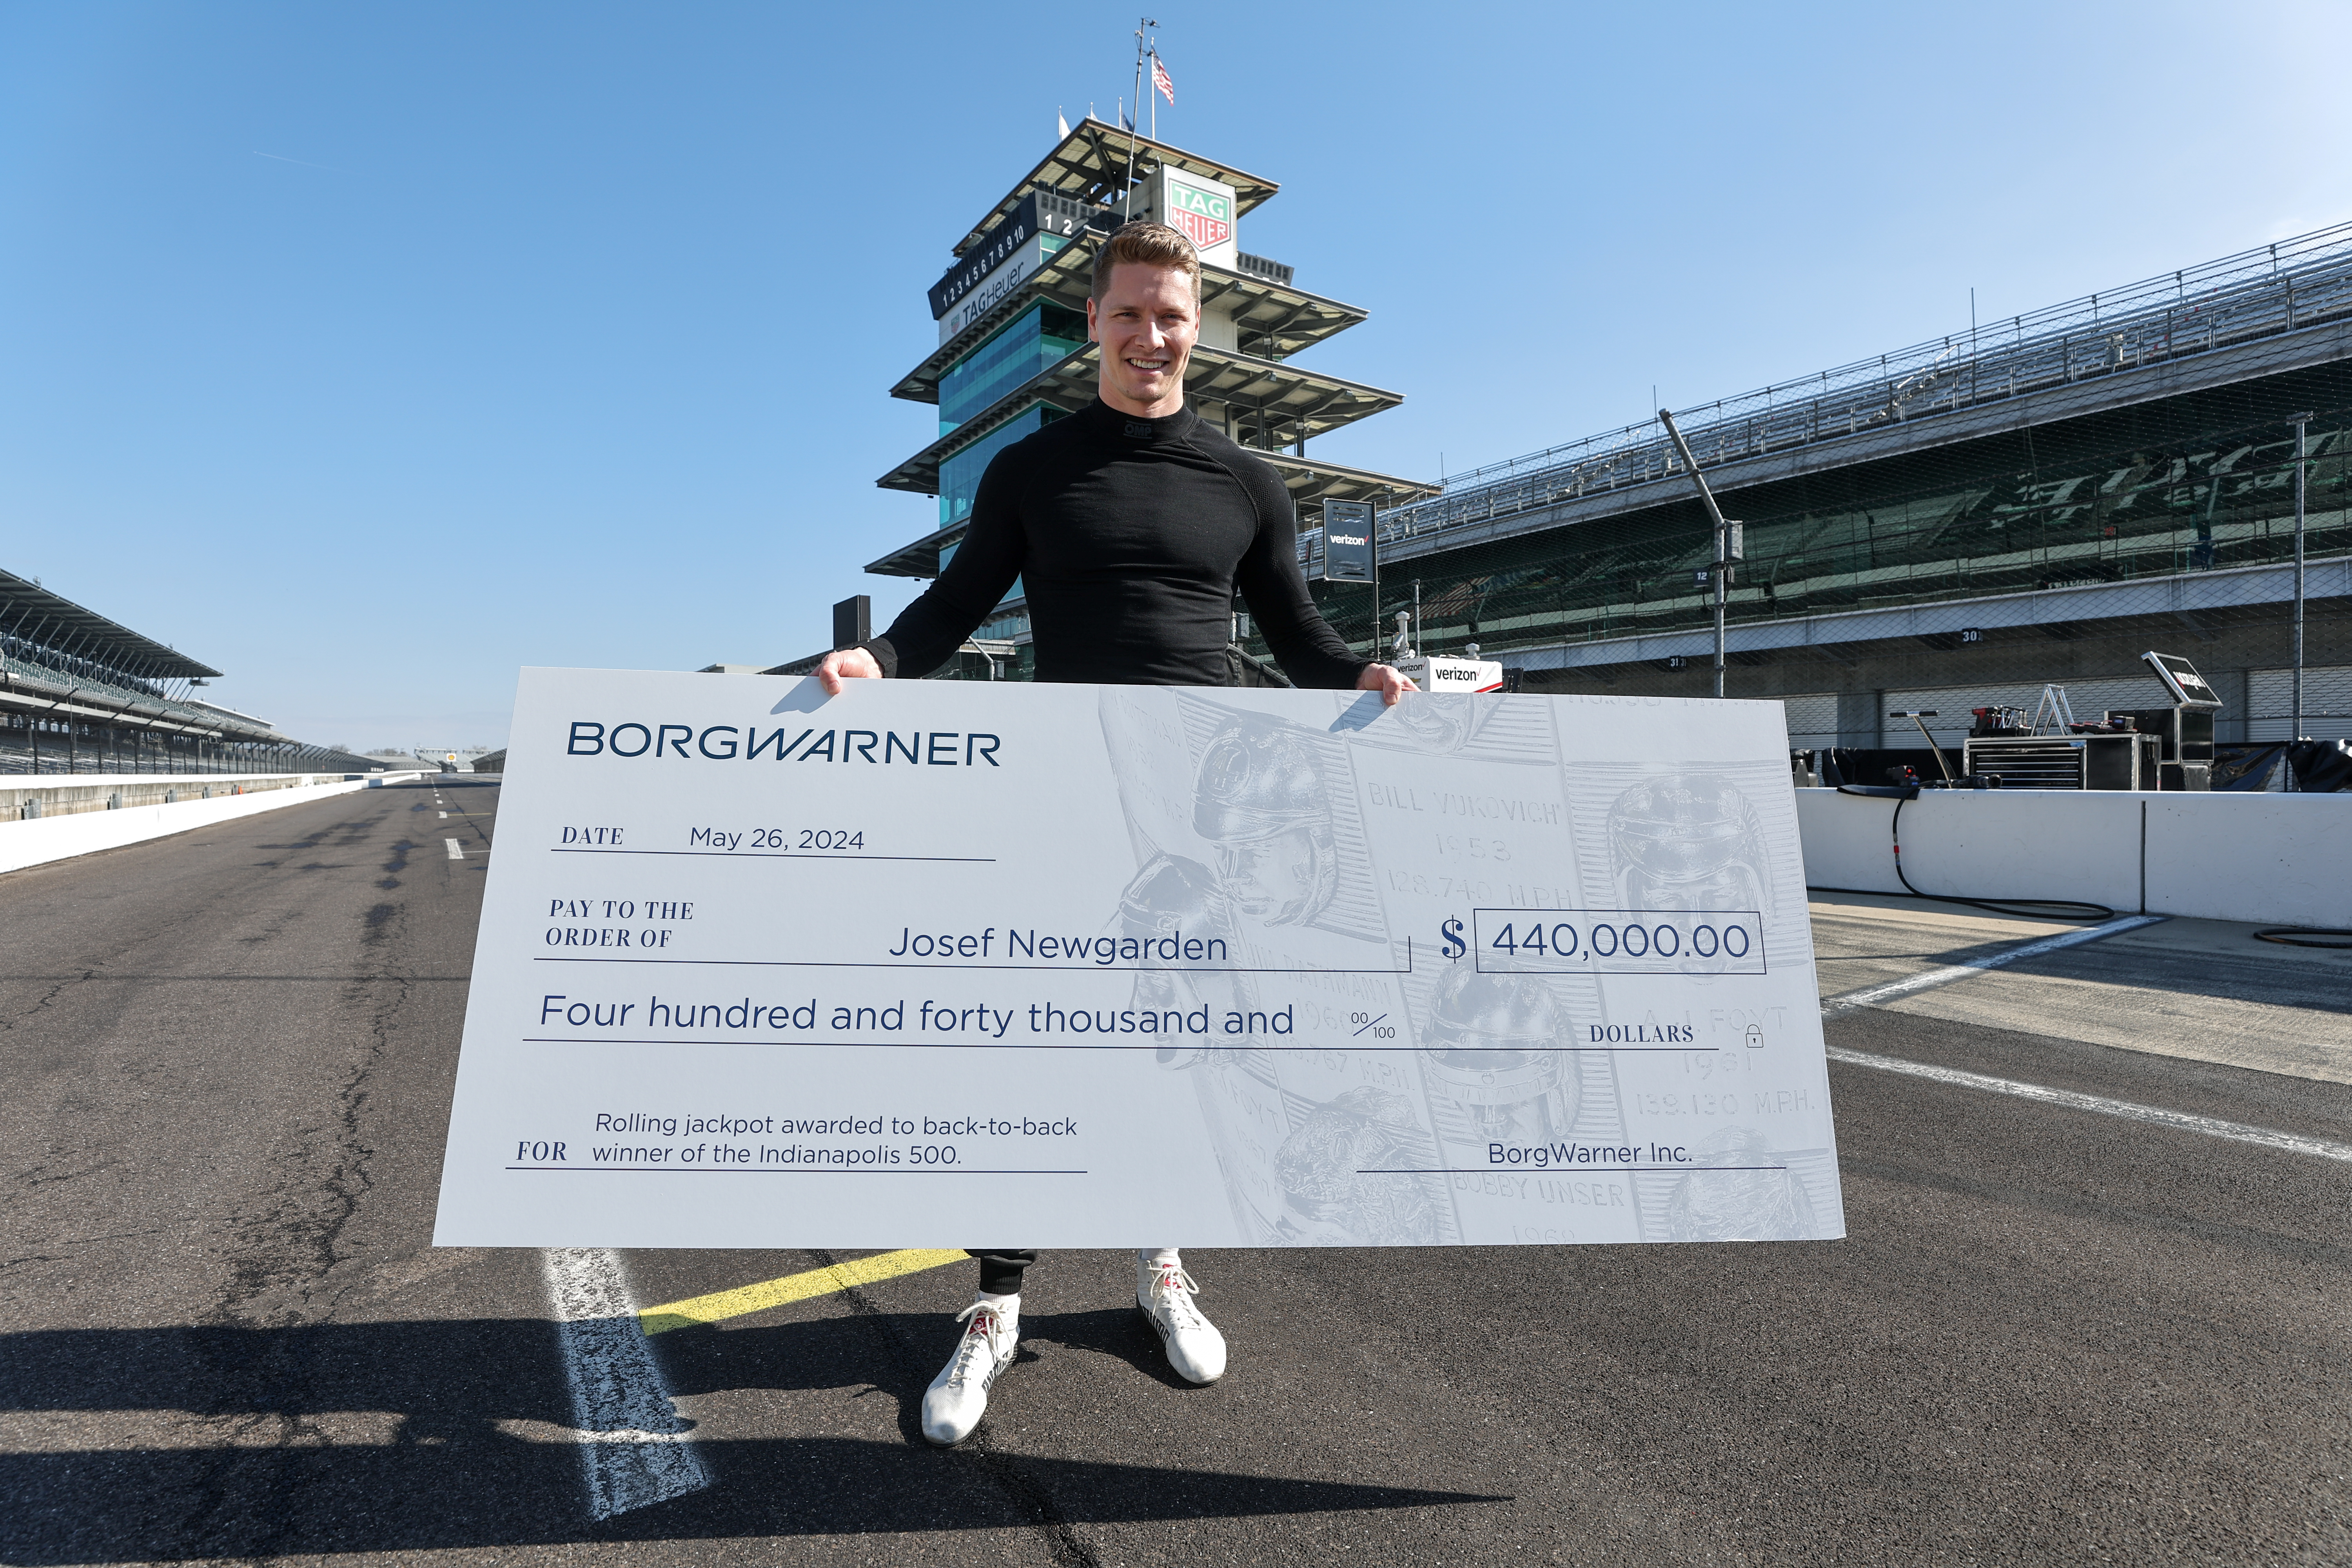 Man in black shirt stands on speedway track holding large check for $440,000